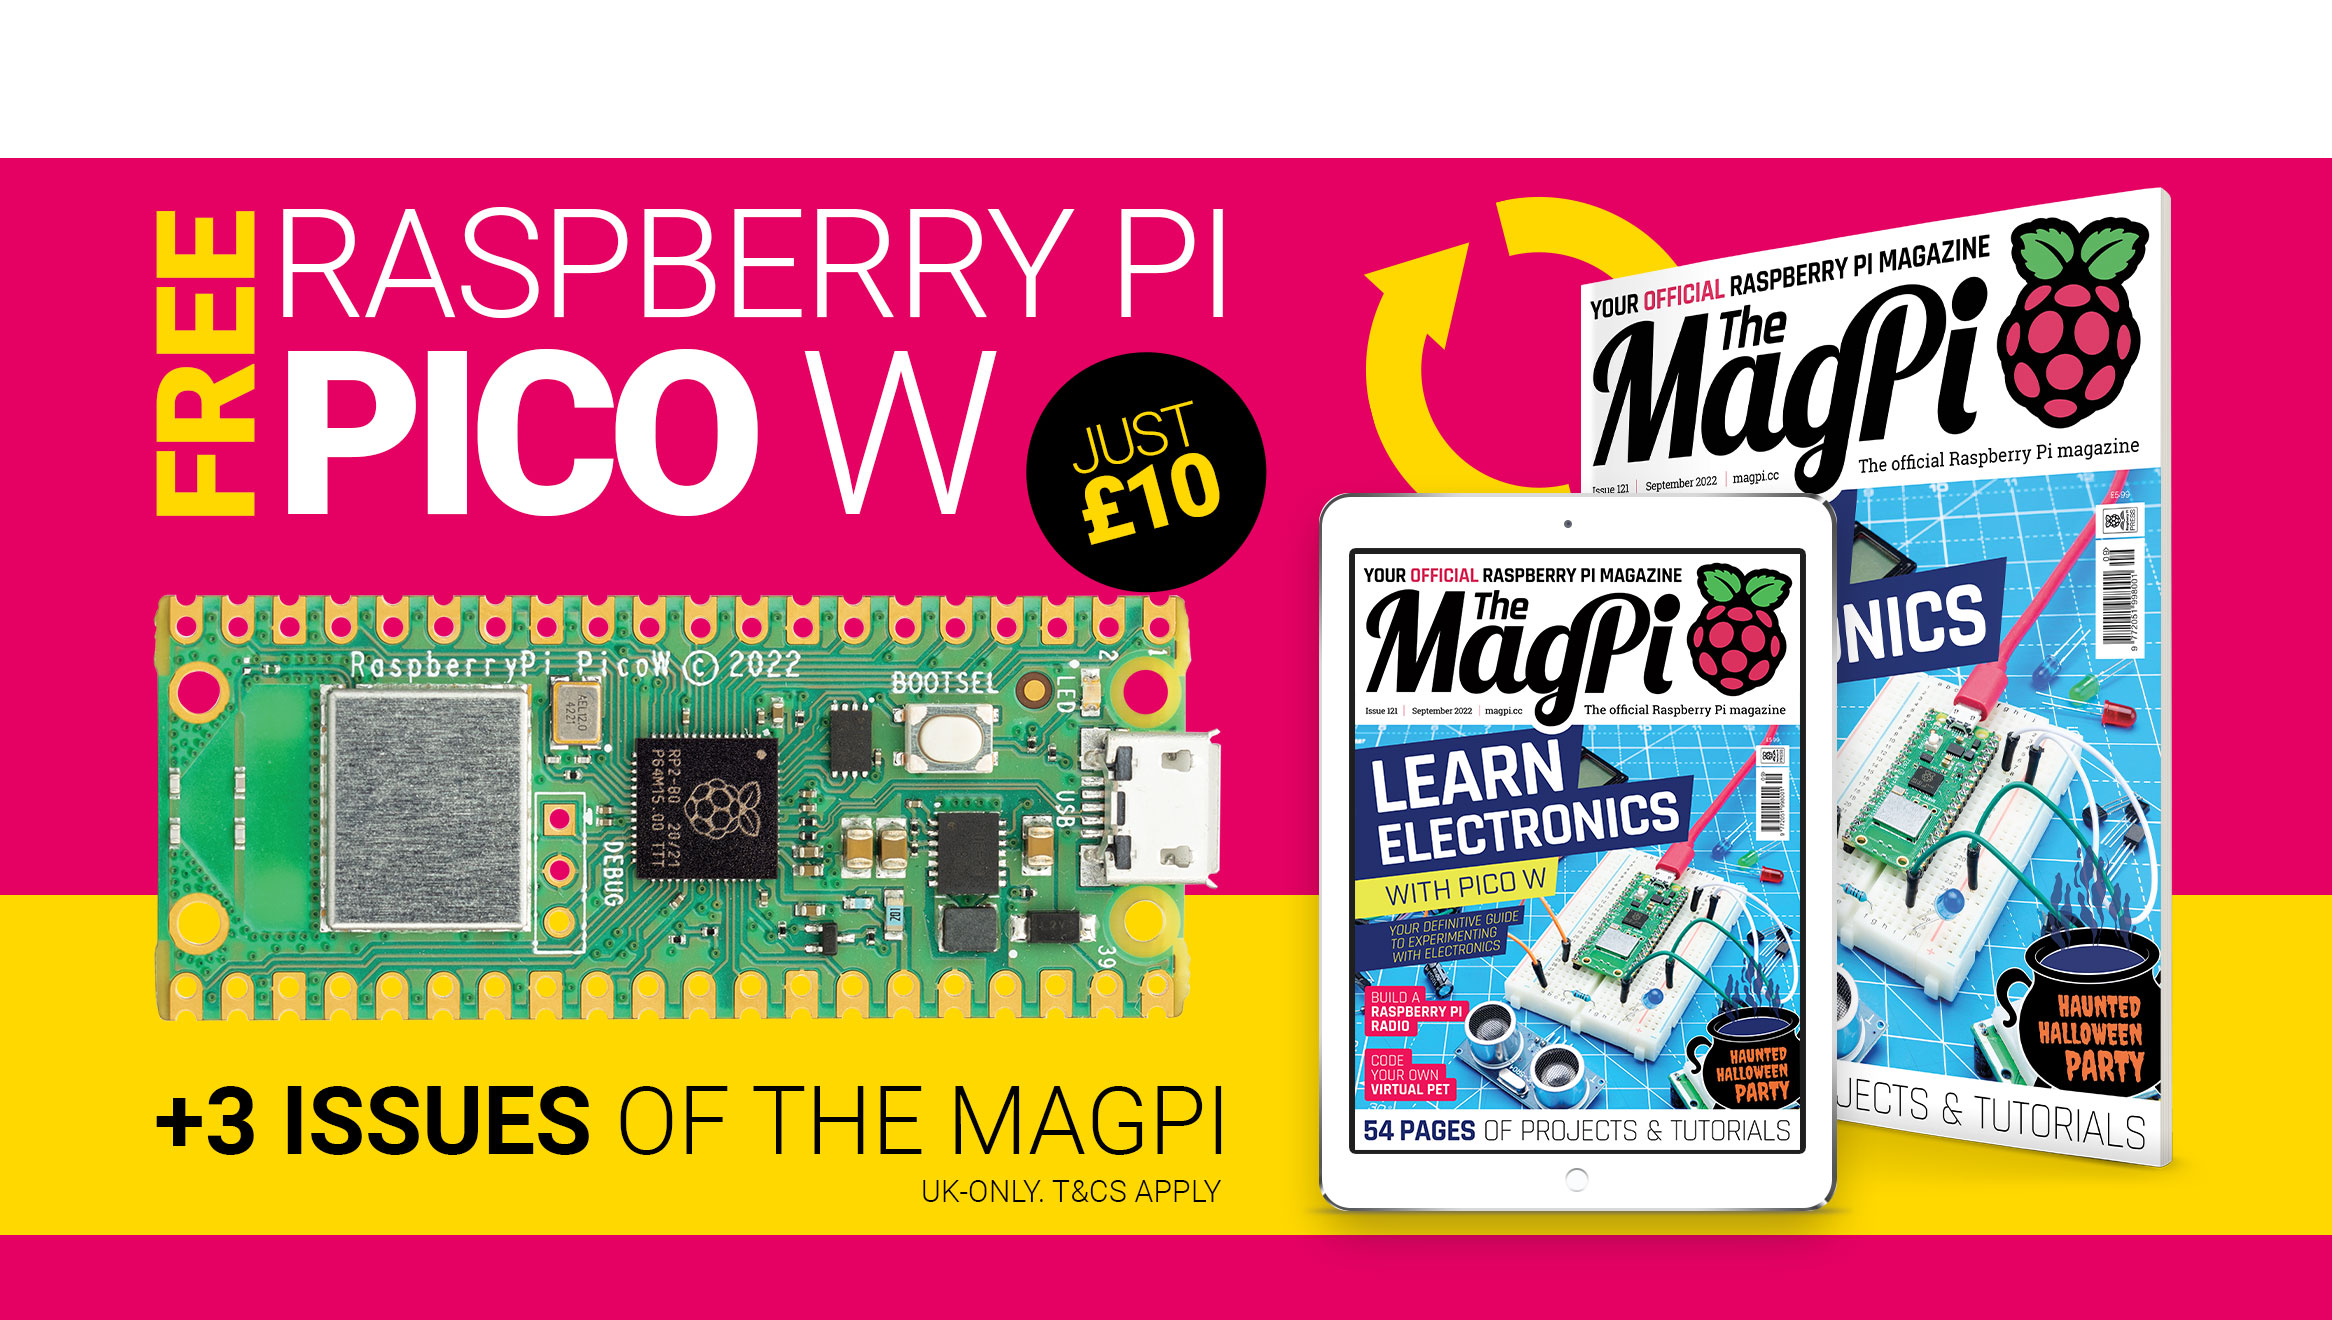 The MagPi issue 121 cover